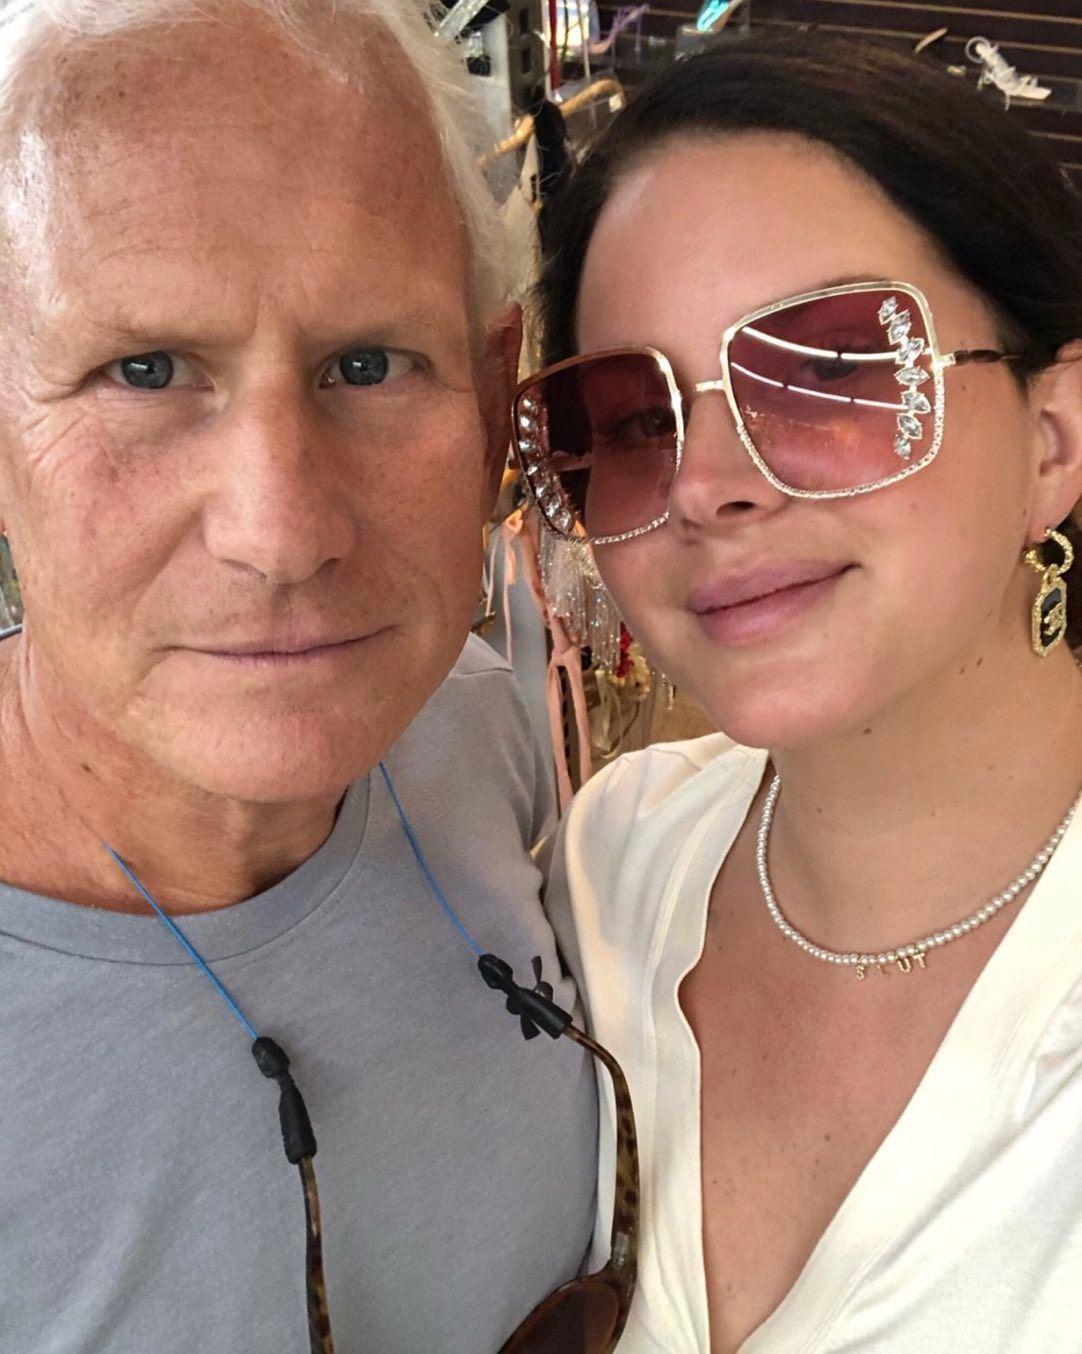 Lana Del Rey's Dad, 69 Set To Launch Music Career With First Album